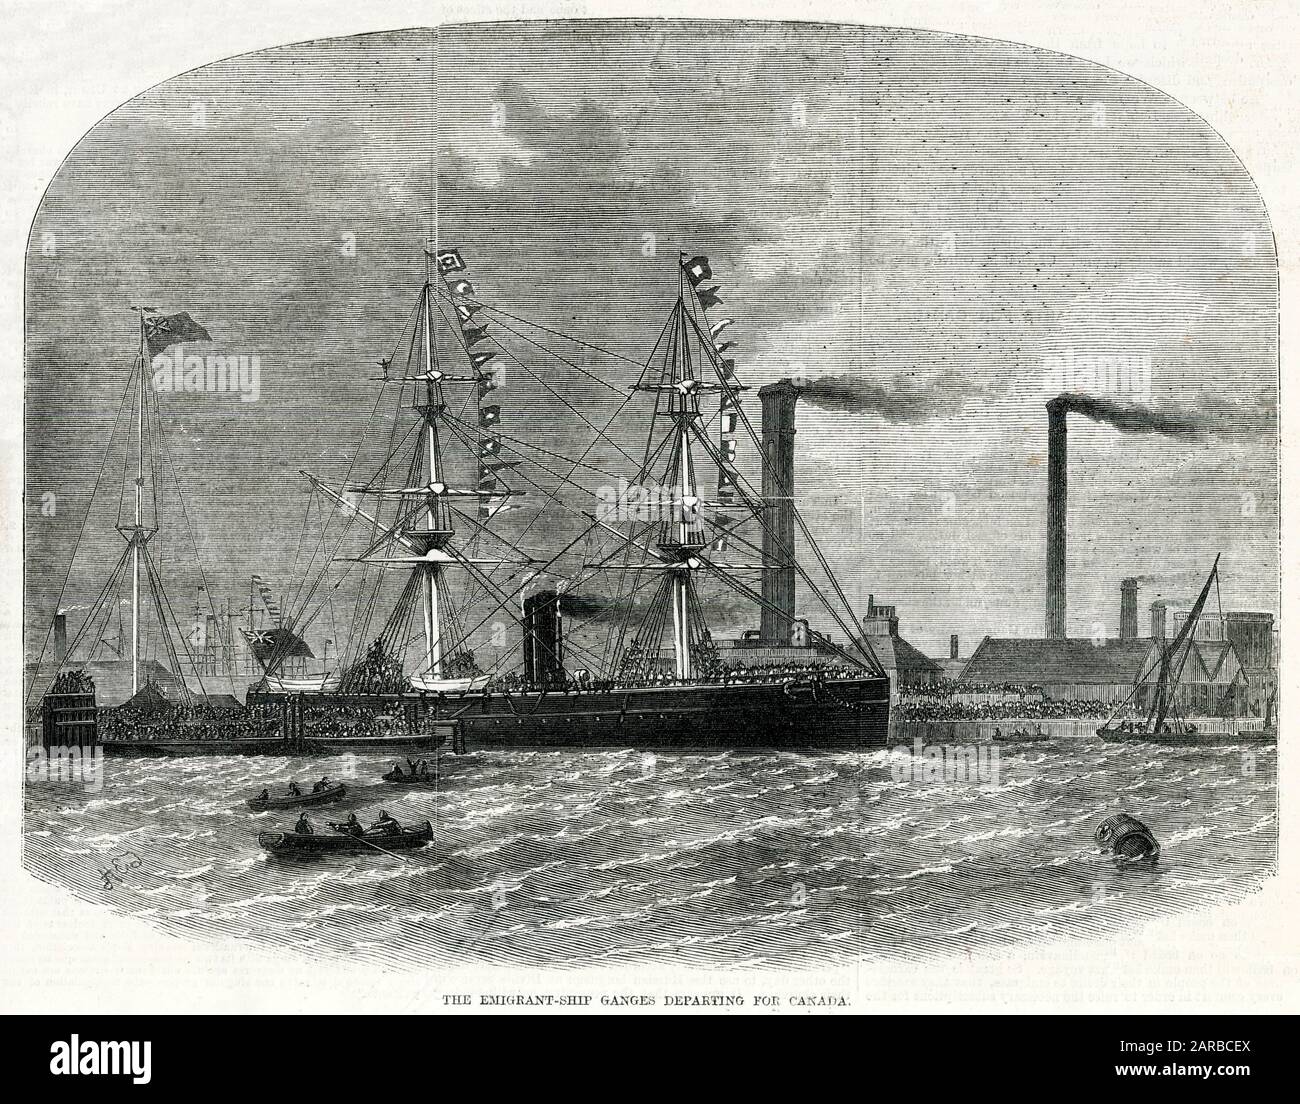 Emigrants ship 'Ganges', departing for Canada 1870 Stock Photo